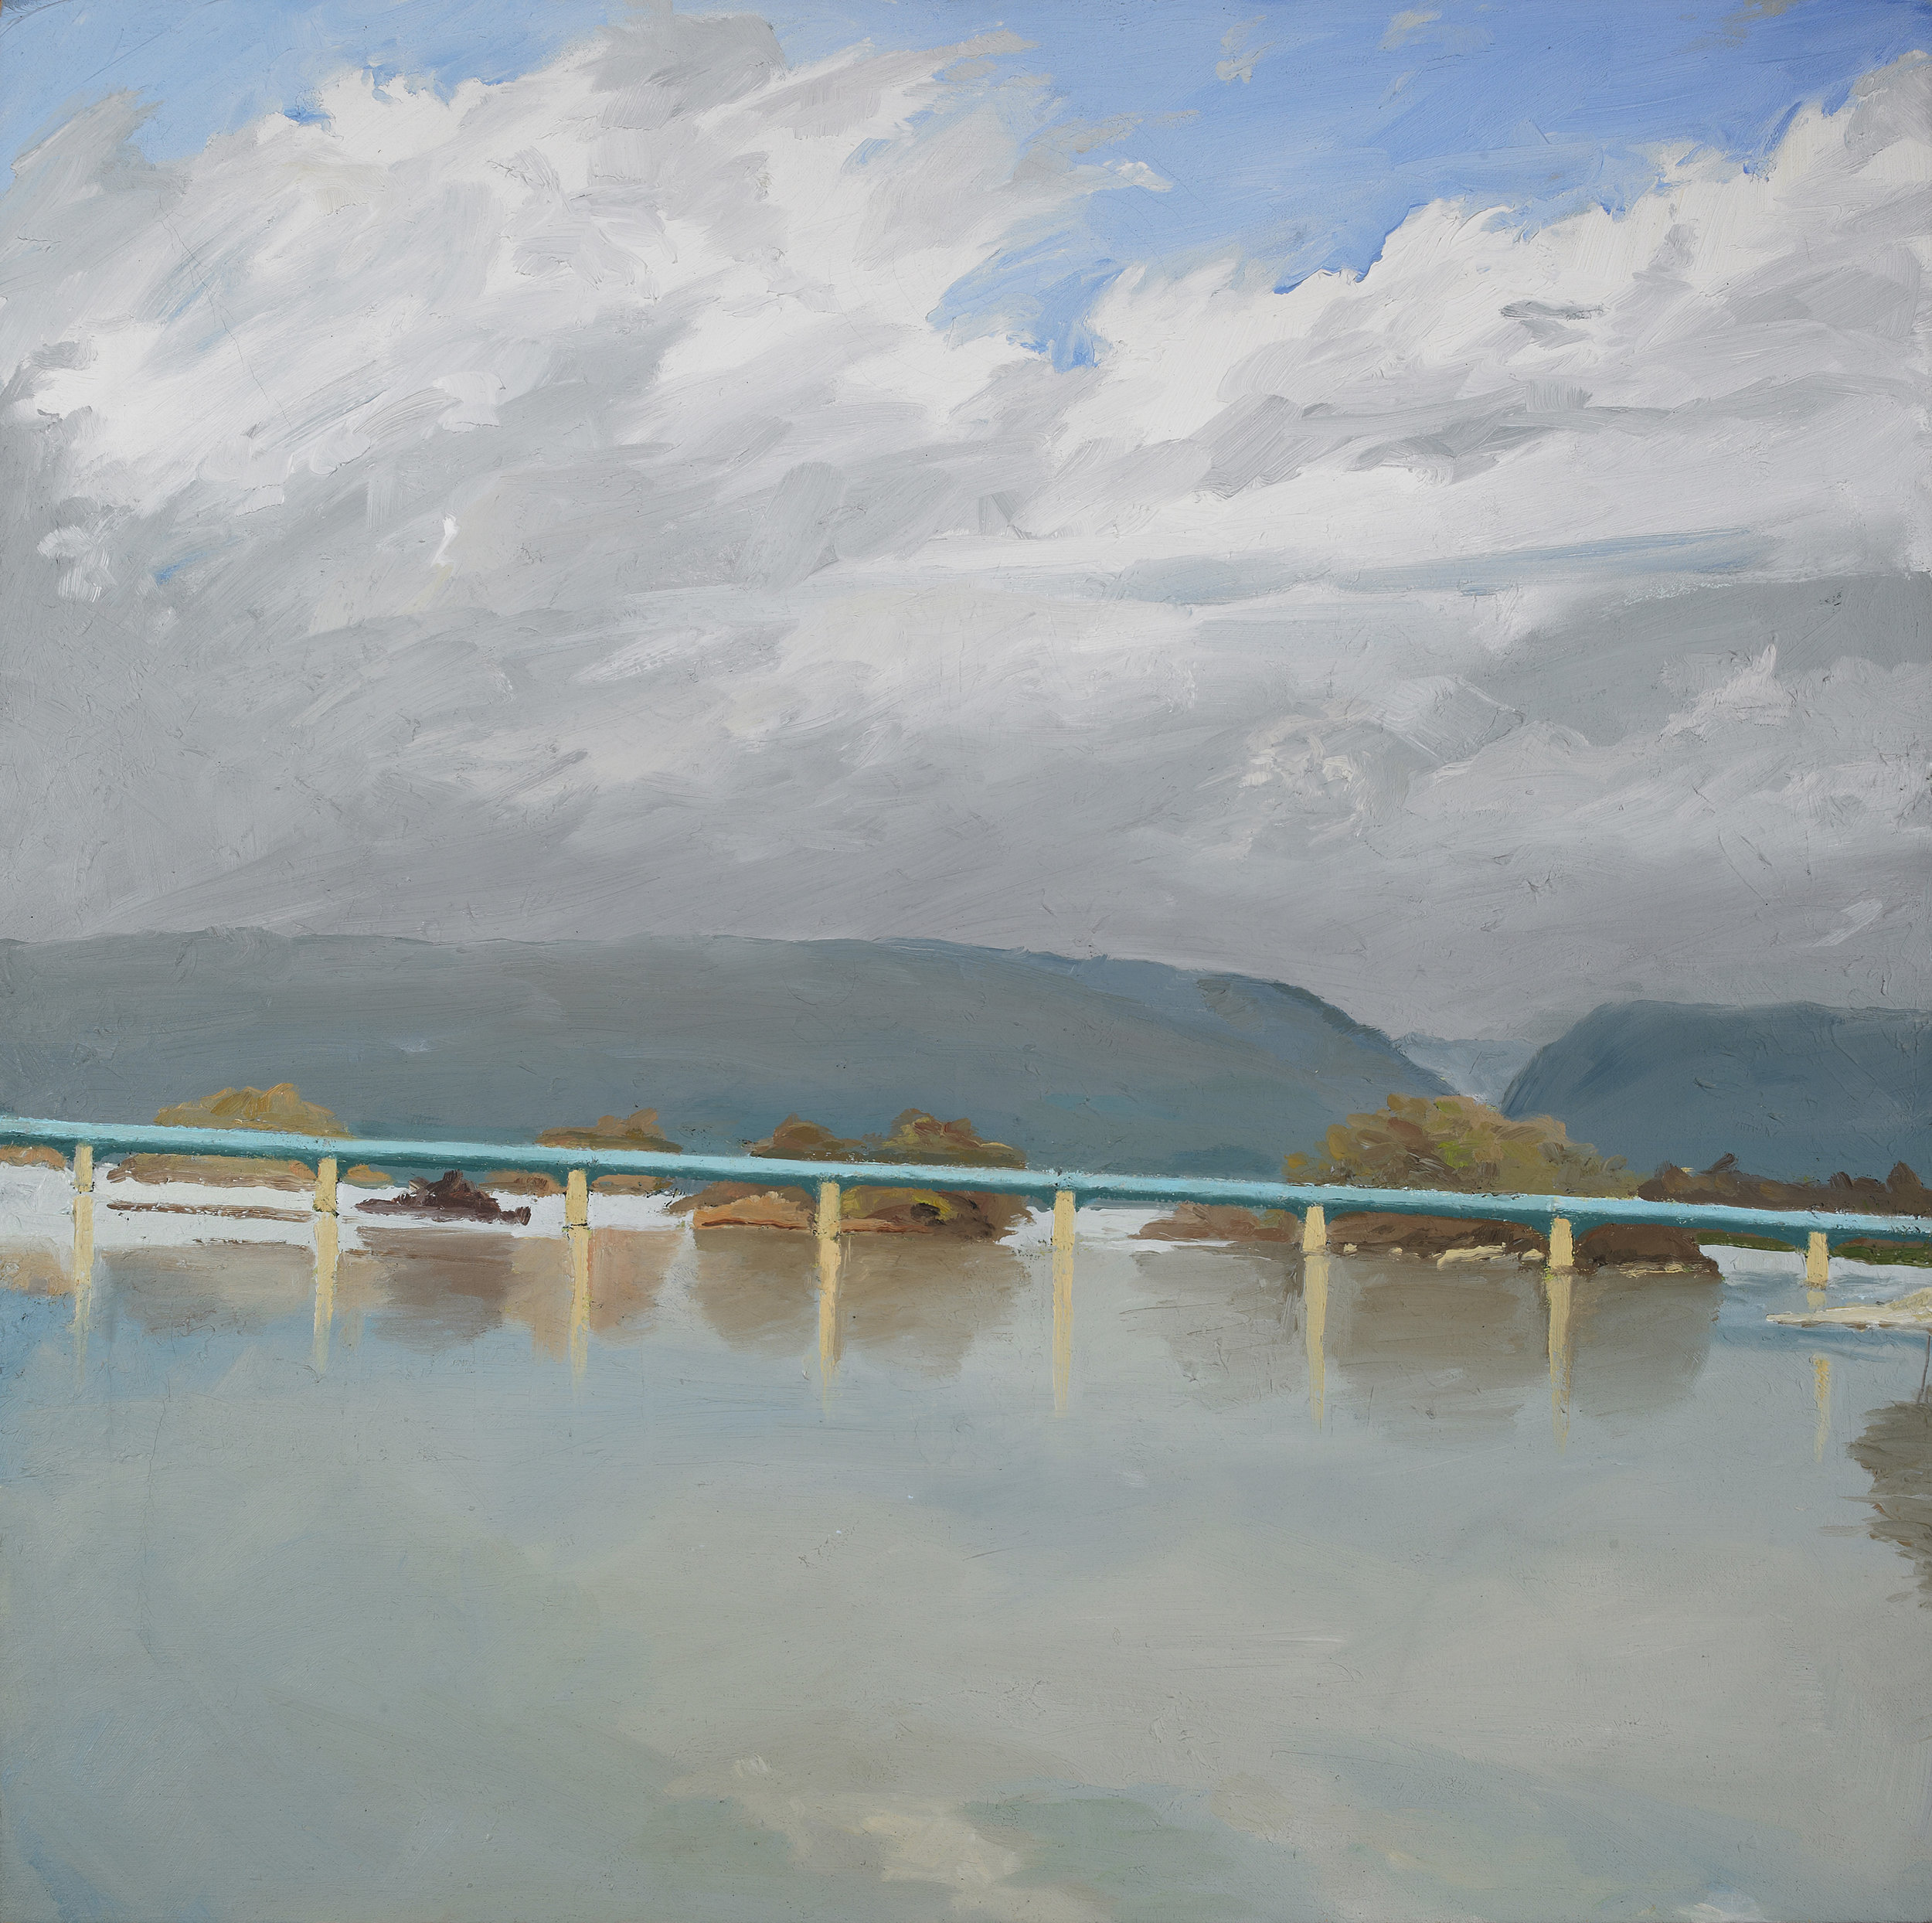   Storm Clouds Over the Susquehanna , Oil on Canvas, 1985, 26" x 26" 